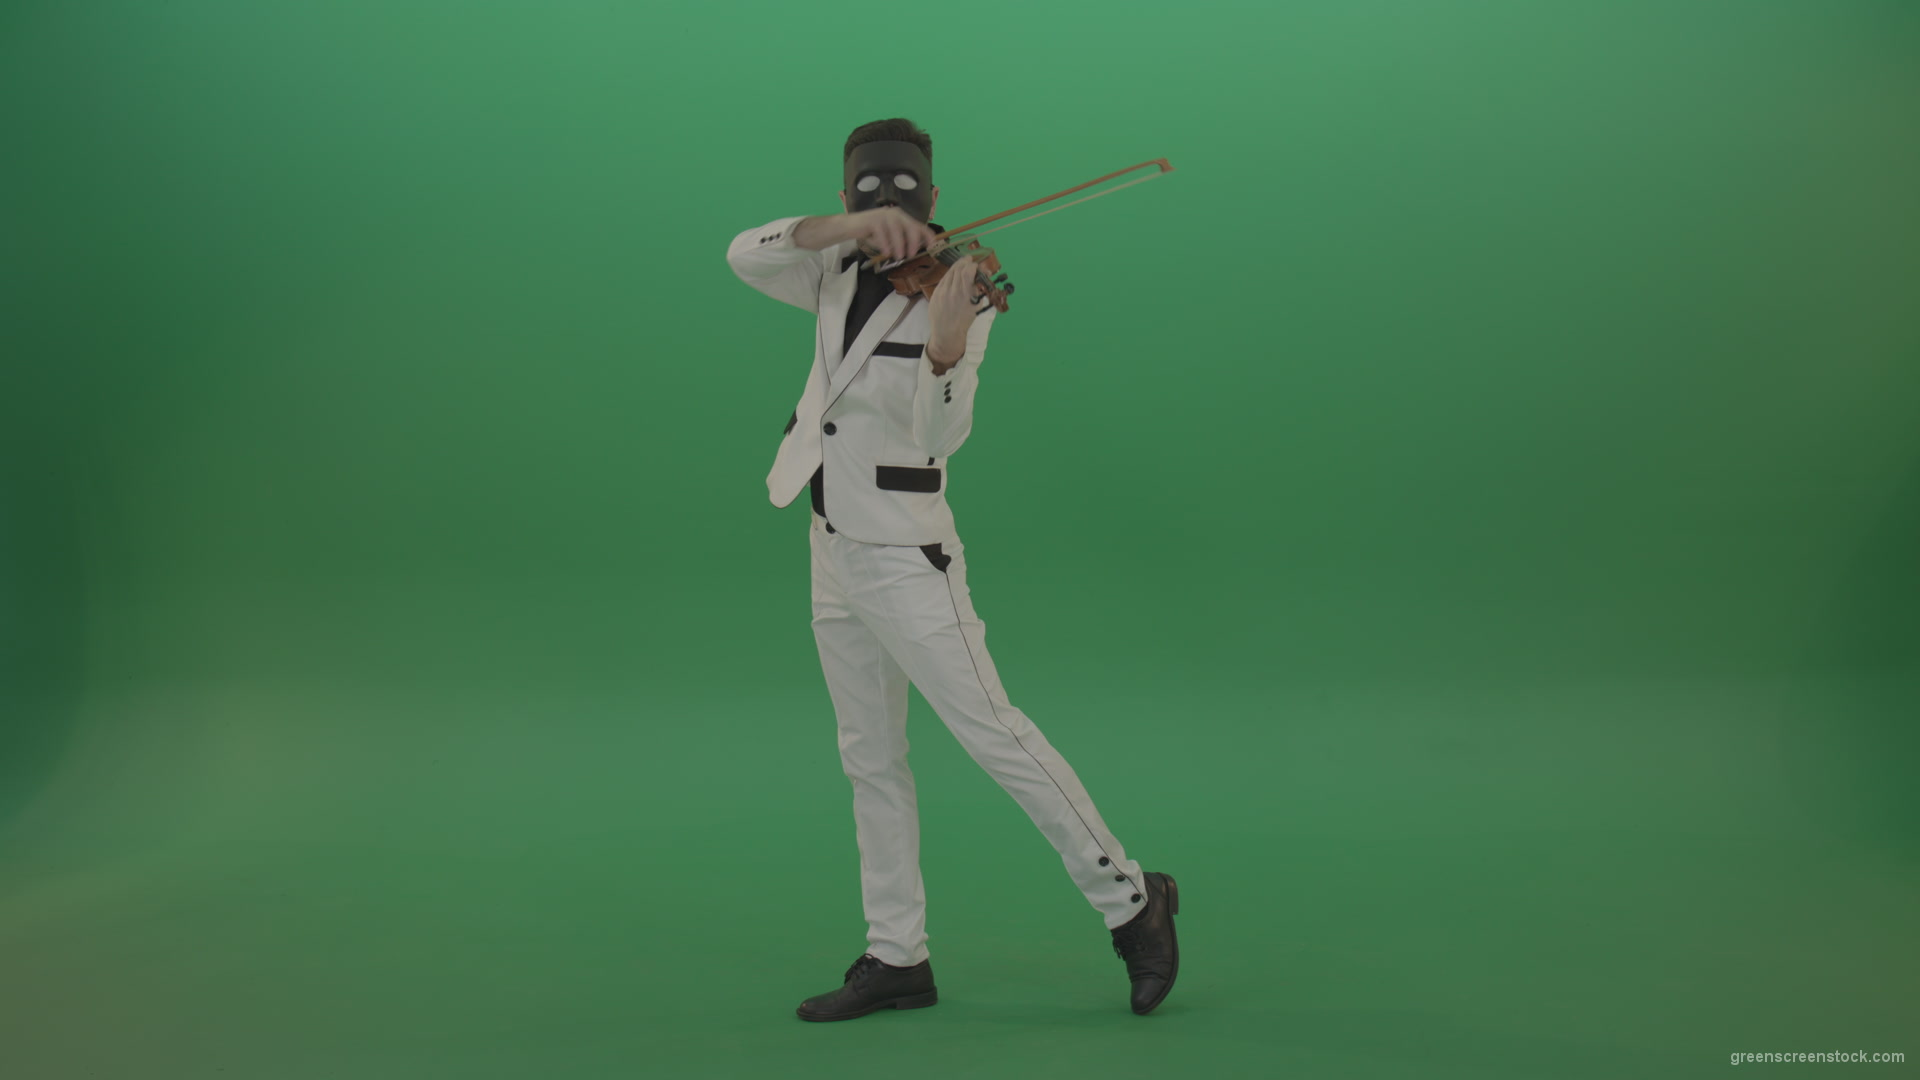 Violinist-in-a-white-jacket-and-in-a-black-mask-with-white-eyes-plays-melodically-on-the-violin_005 Green Screen Stock